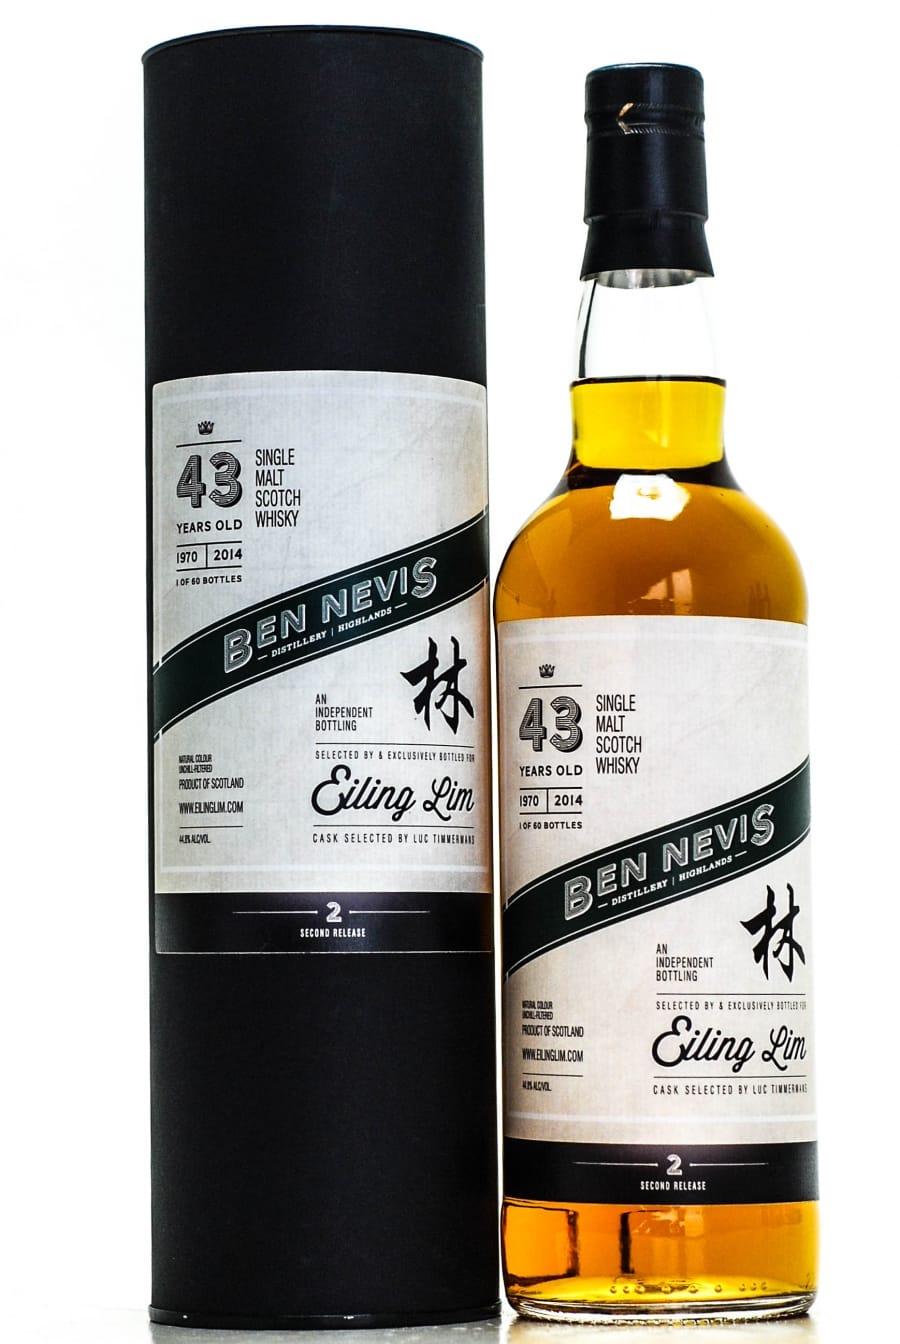 Ben Nevis - 43 Years Old Eiling Lim 2nd Release 1 of 60 bottles 44.8% 1970 In Original Container